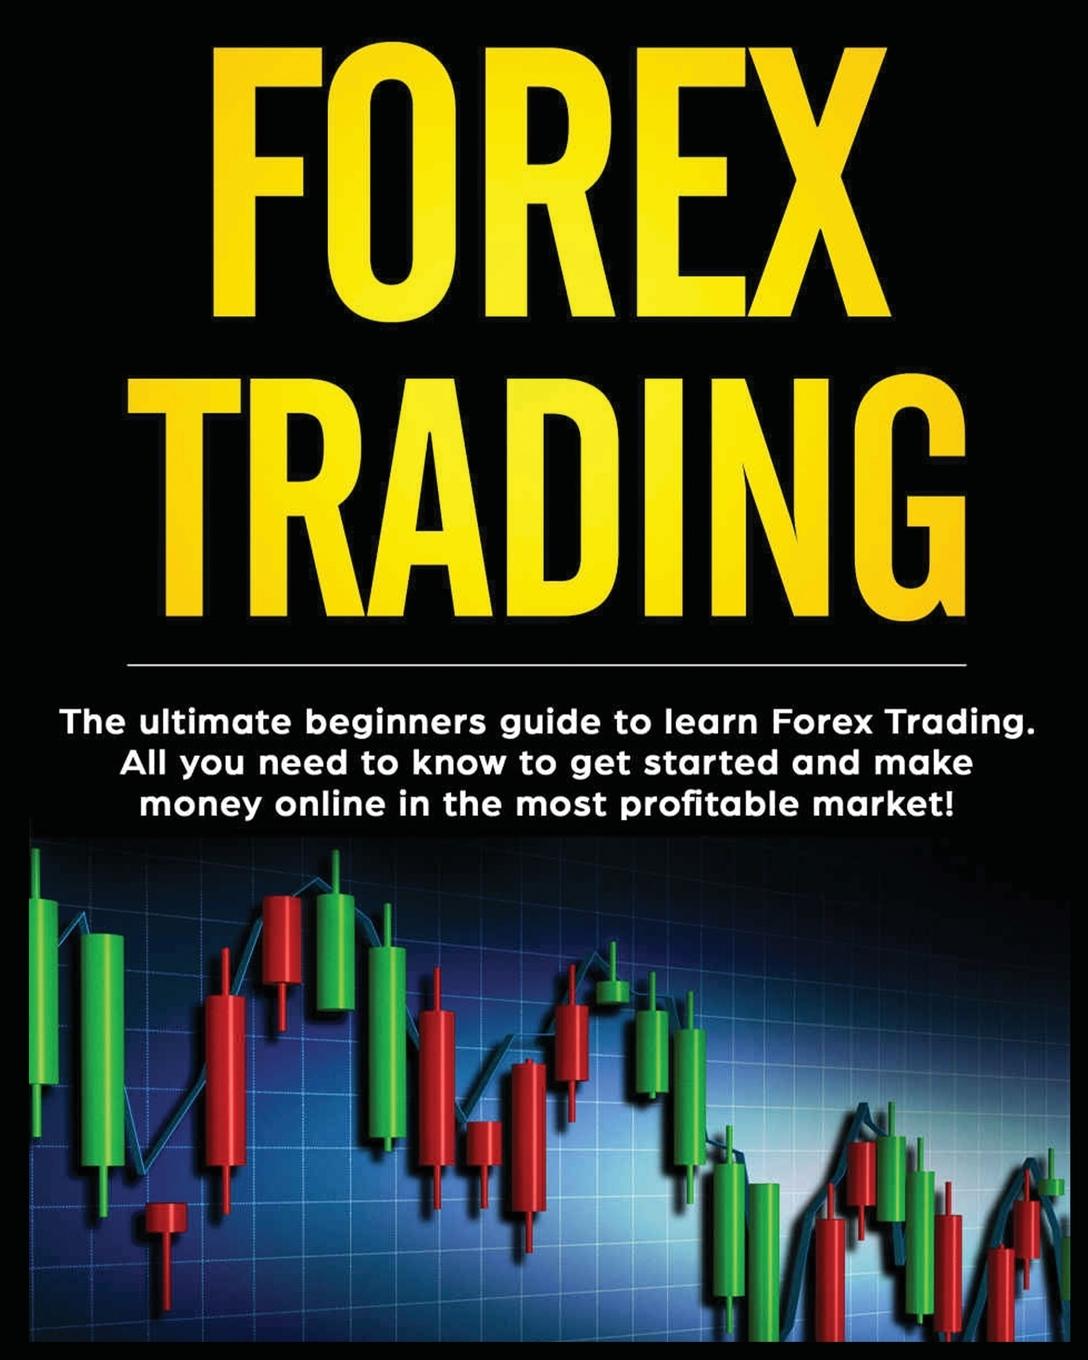 Book Forex Trading 